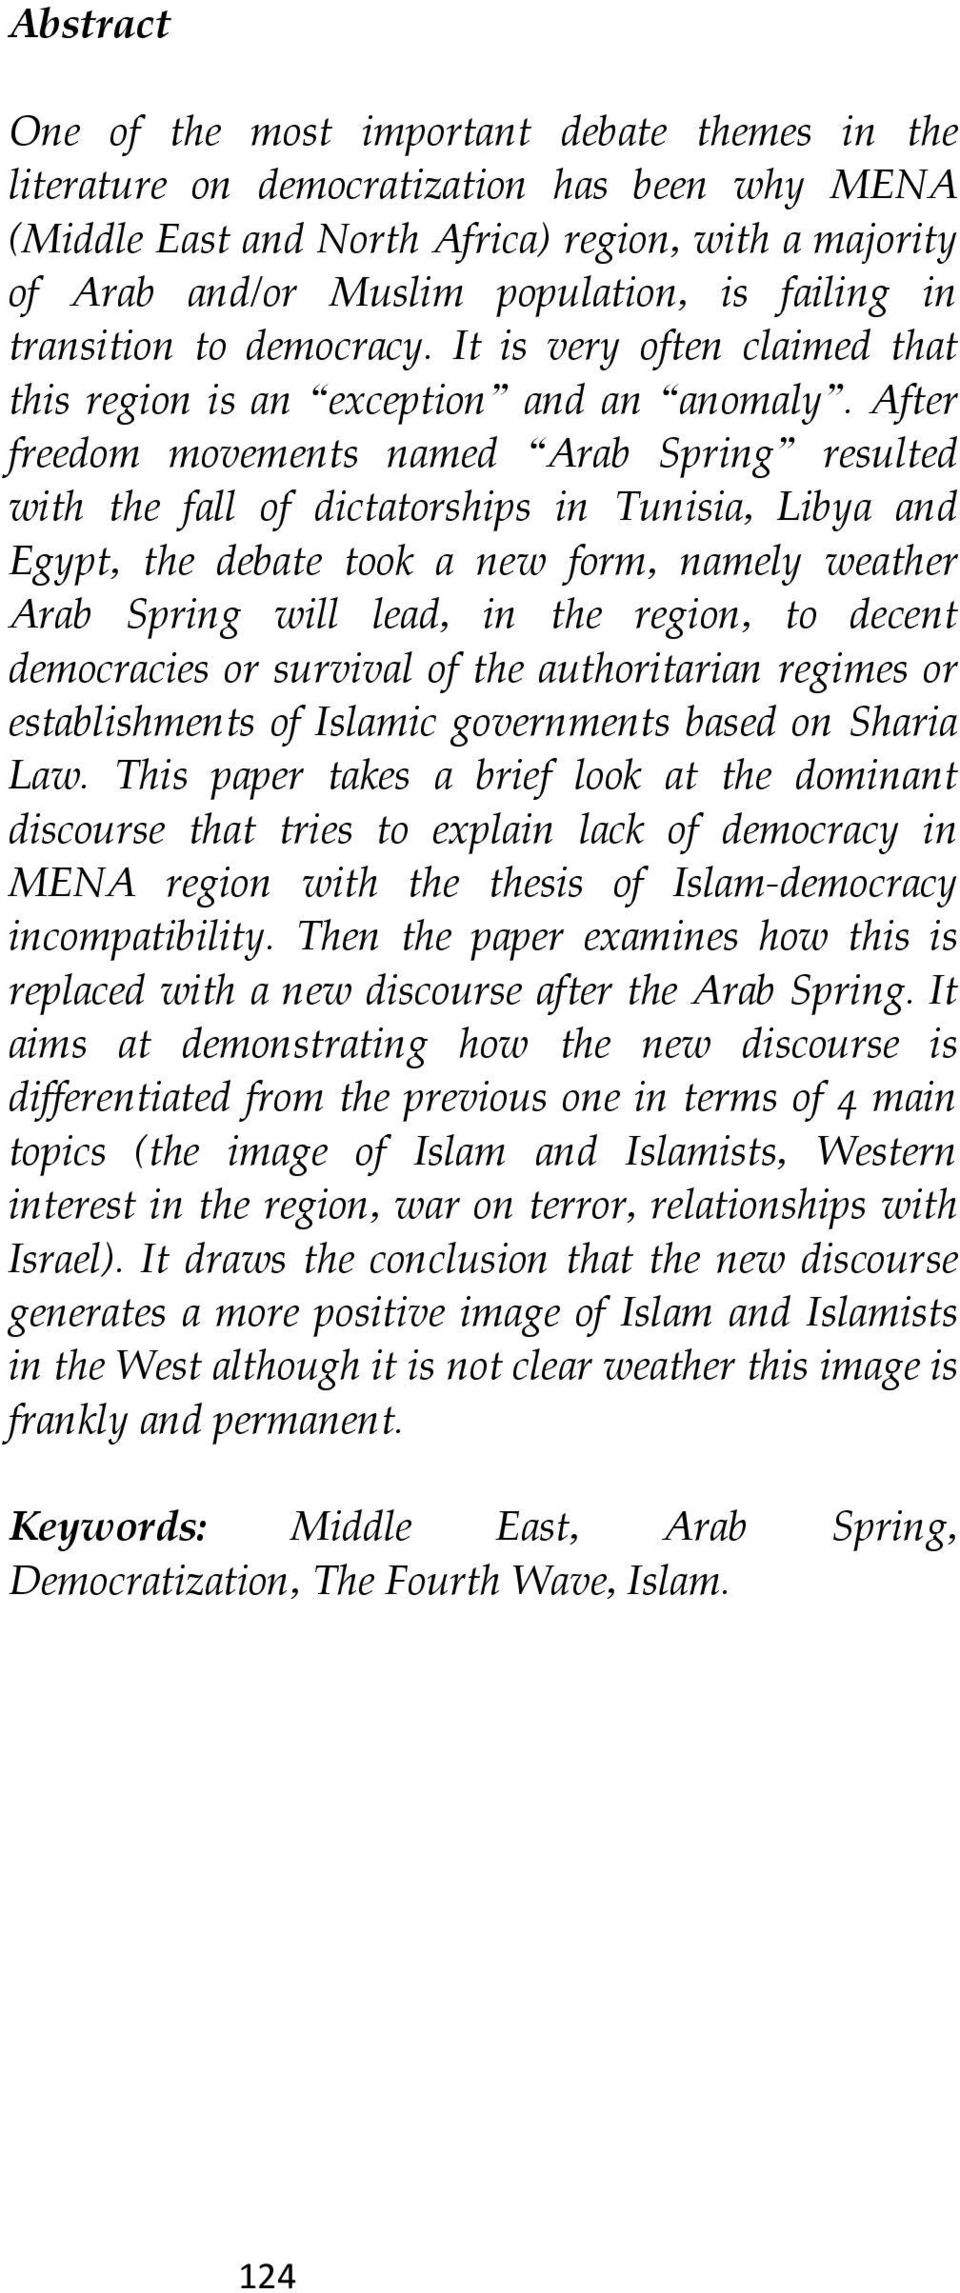 After freedom movements named Arab Spring resulted with the fall of dictatorships in Tunisia, Libya and Egypt, the debate took a new form, namely weather Arab Spring will lead, in the region, to